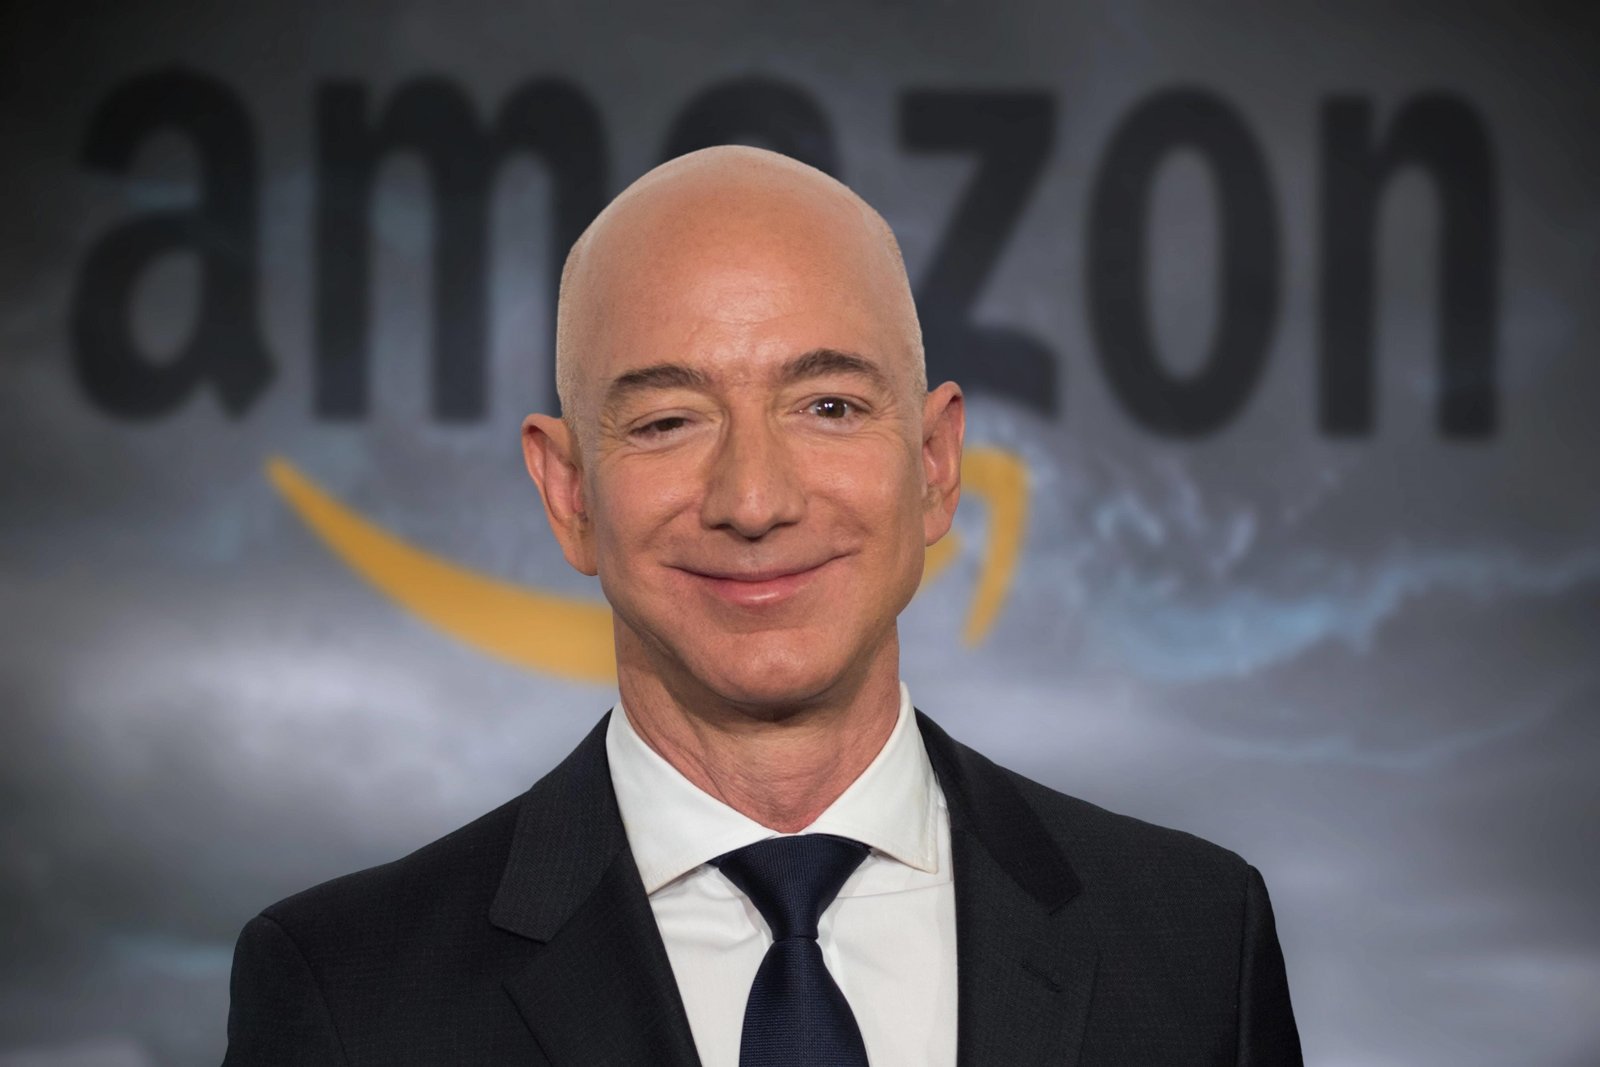 Jeff Bezos changes official Amazon business philosophy before leaving